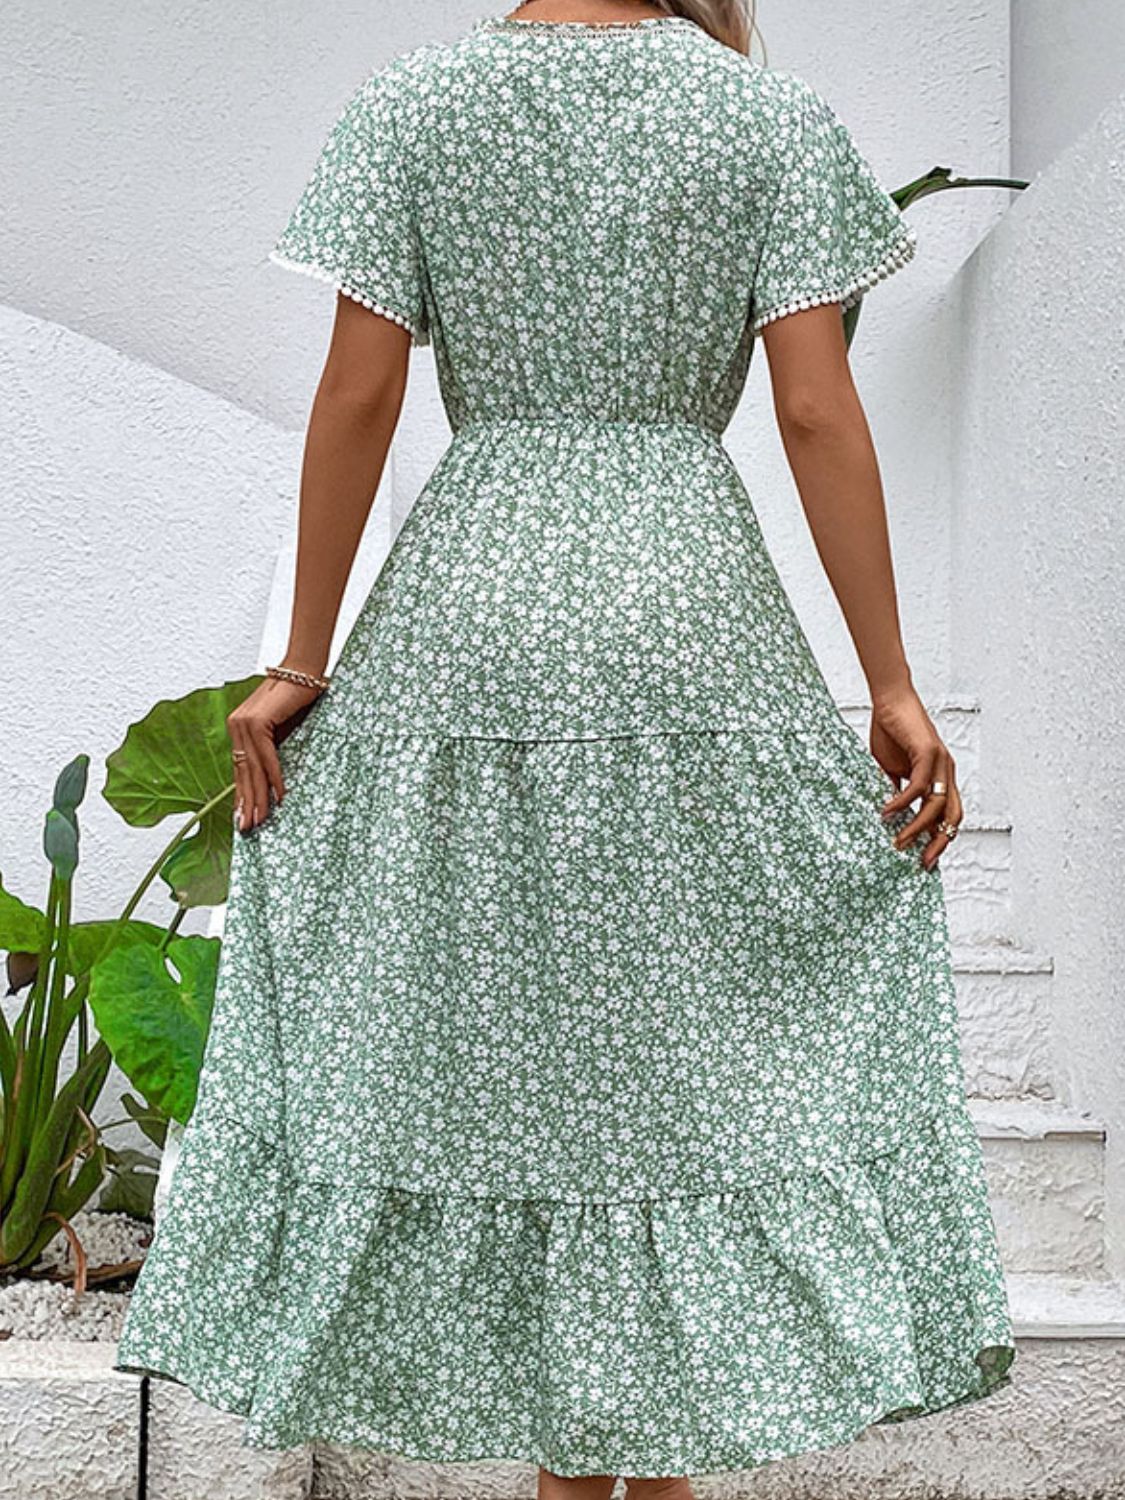 Chic Ditsy Floral V-Neck Tiered Dress: Perfect Summer Beach Wedding Attire for Women